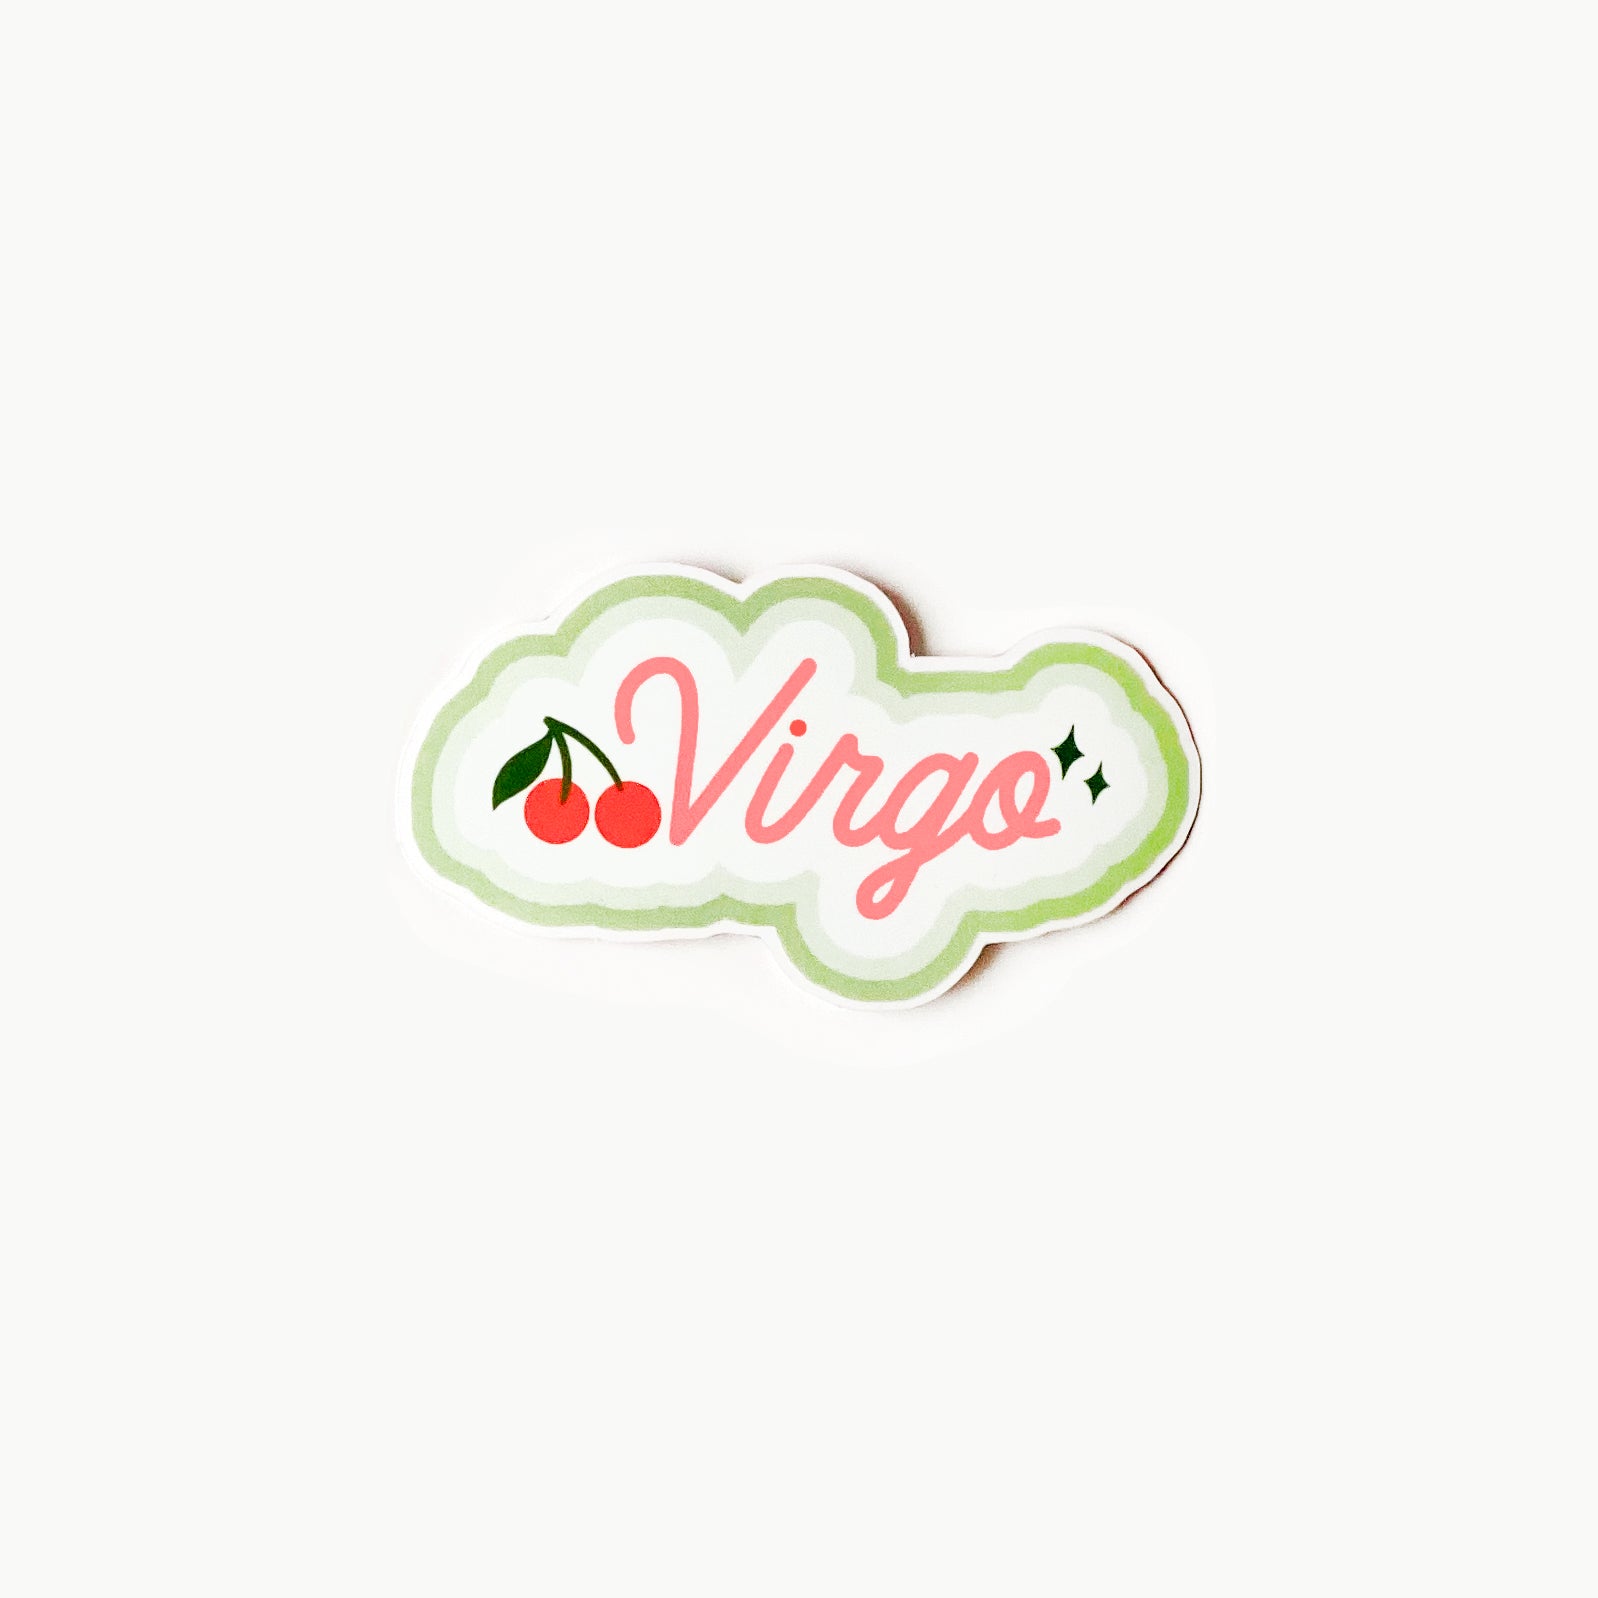 Clear Heart Stickers - Modern – Virgo and Paper